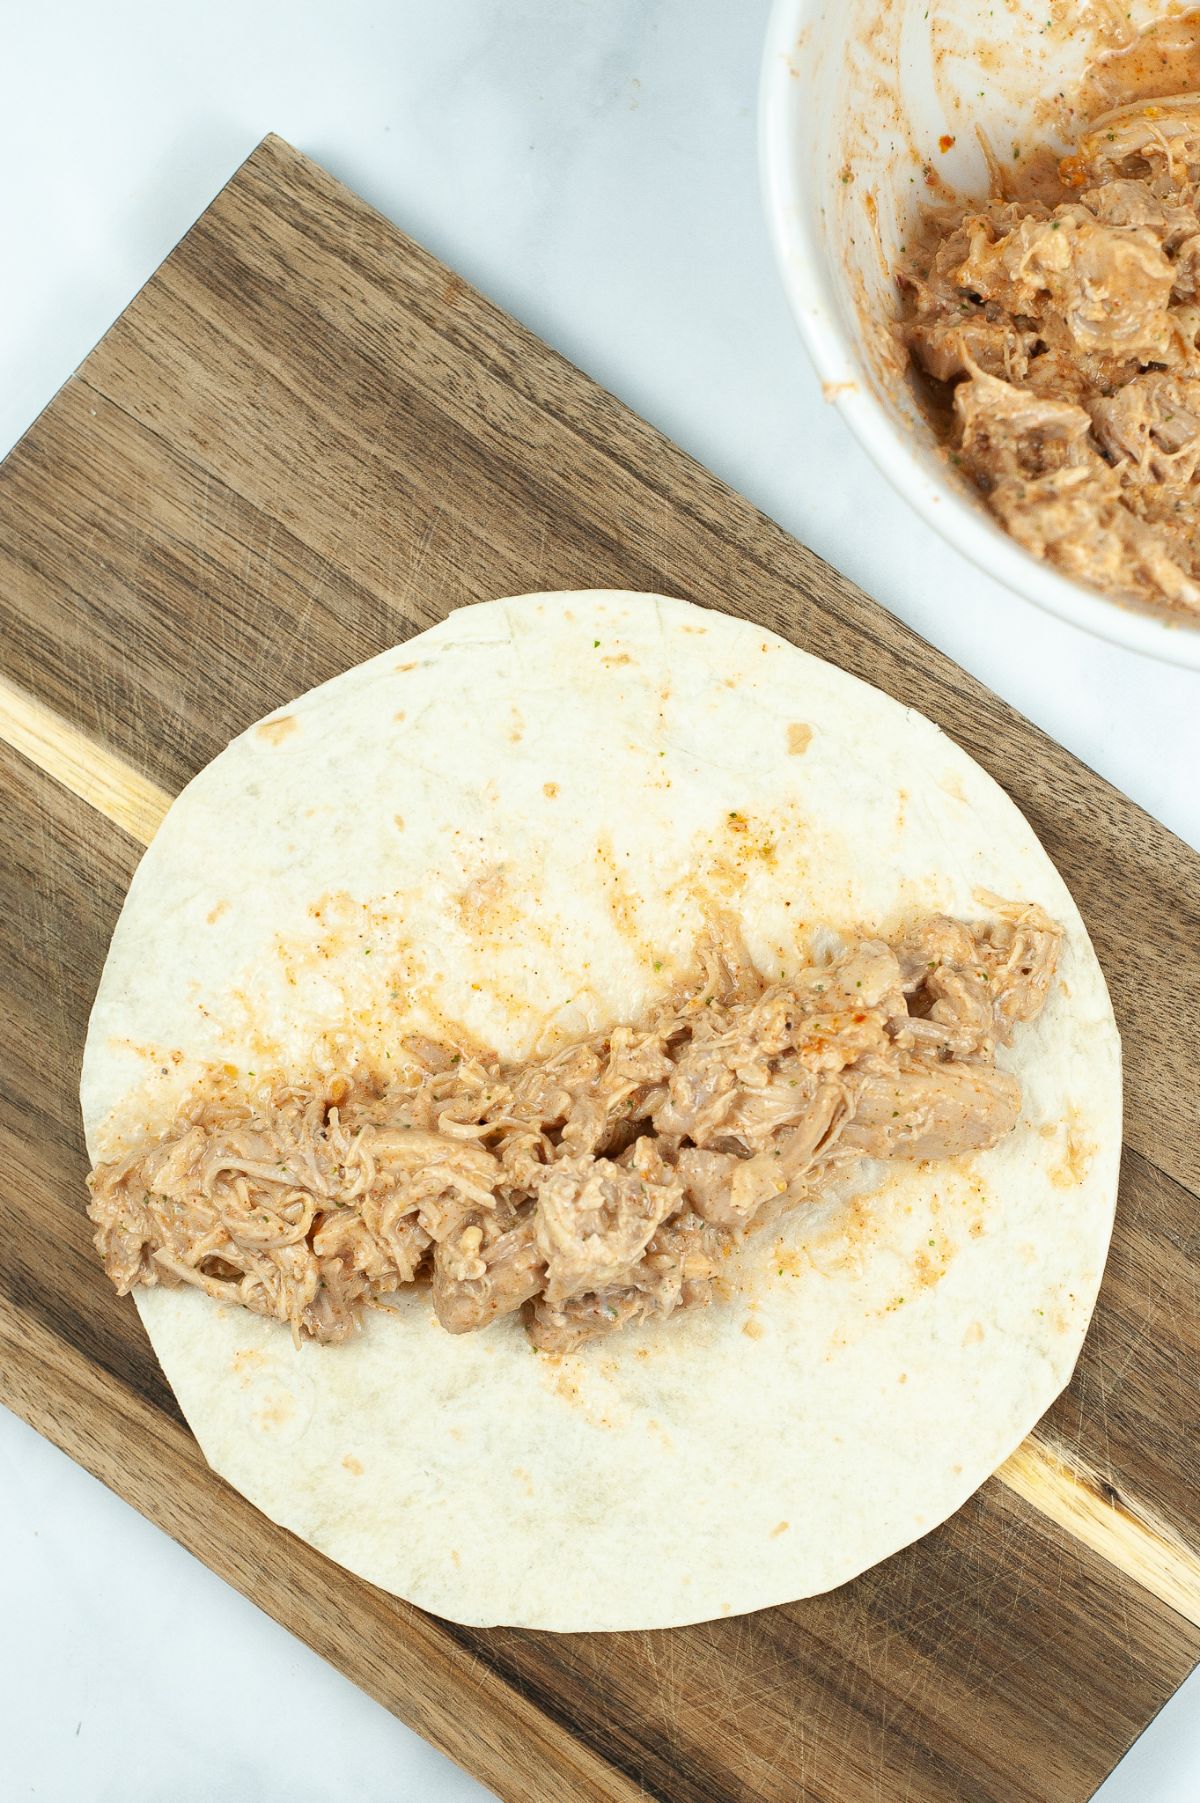 Flattened tortilla wrap with the chicken mixture on the center.